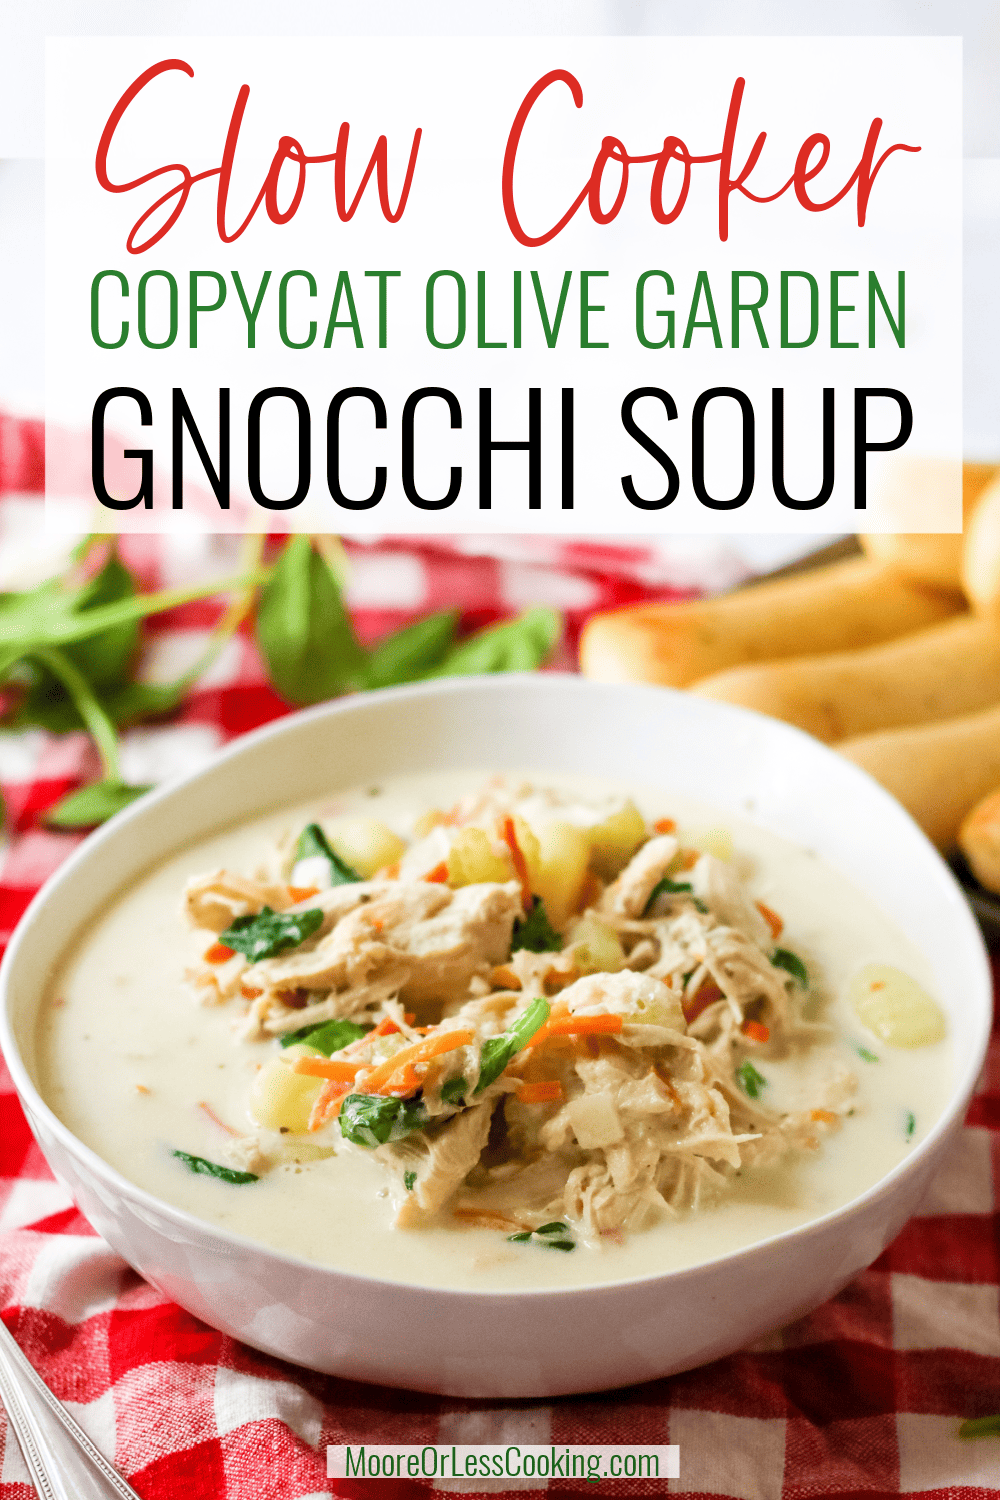 Creamy, flavorful and full of veggies and chicken, this Slow Cooker Copycat Olive Garden Gnocchi Soup is perfect for chilly days. All the textures and tastes are there from the potato gnocchi to the shredded chicken, carrots, spinach, cheese and aromatic seasonings. Let your slow cooker help you make this popular soup right in your own kitchen! via @Mooreorlesscook